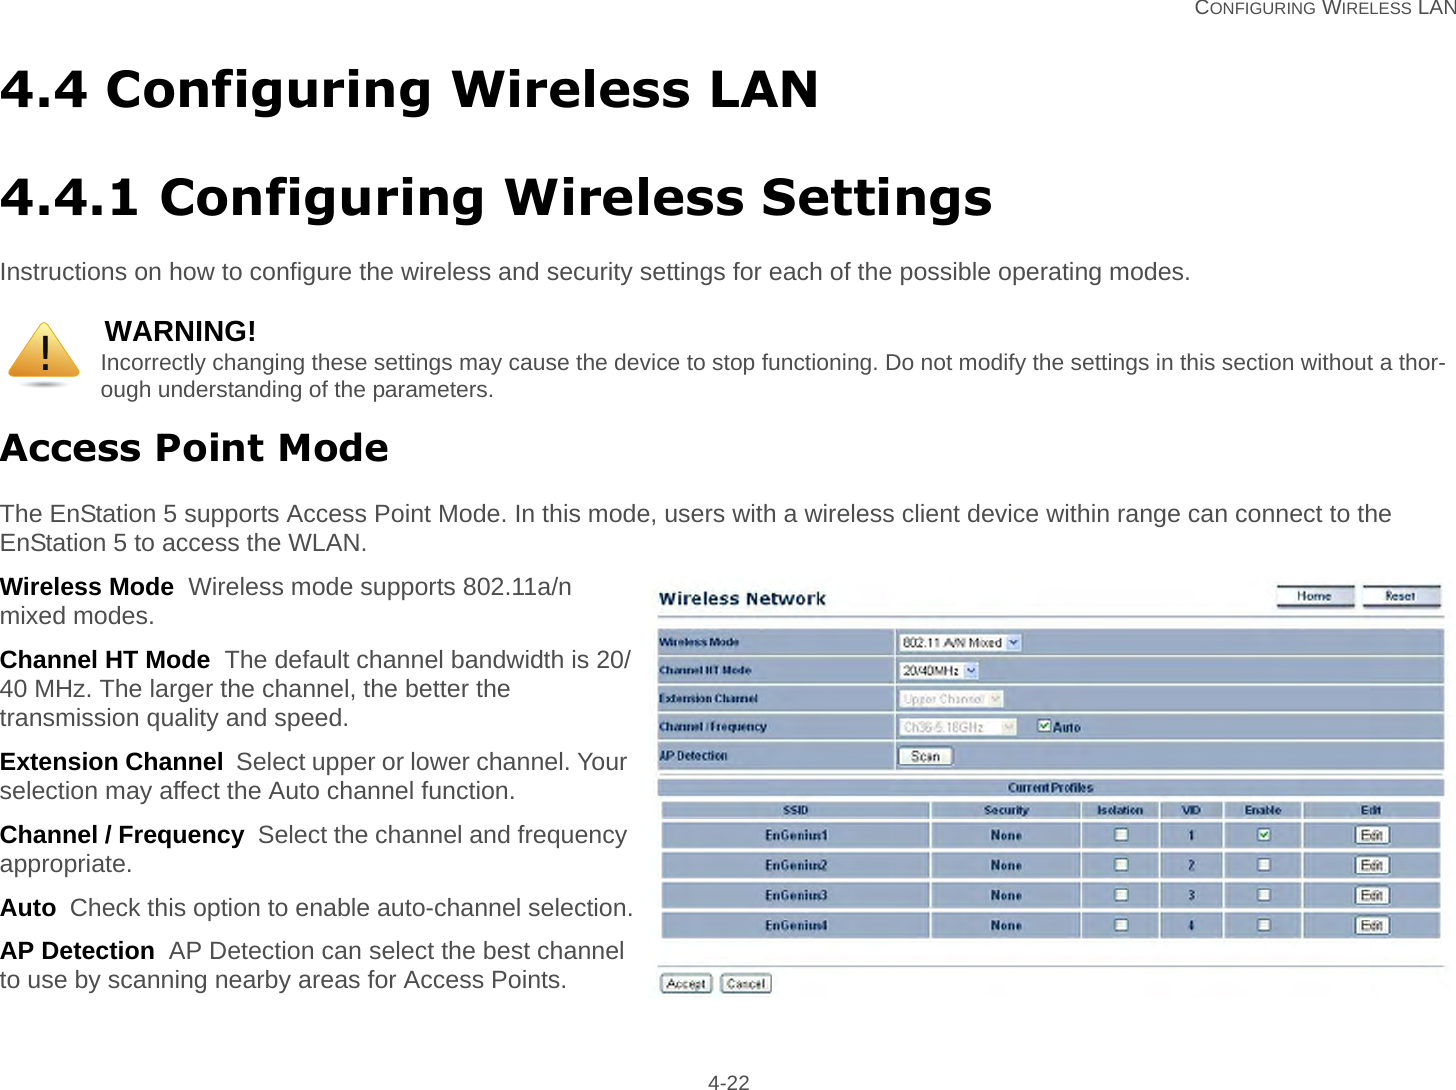   CONFIGURING WIRELESS LAN 4-224.4 Configuring Wireless LAN4.4.1 Configuring Wireless SettingsInstructions on how to configure the wireless and security settings for each of the possible operating modes.Access Point ModeThe EnStation 5 supports Access Point Mode. In this mode, users with a wireless client device within range can connect to the EnStation 5 to access the WLAN.Wireless Mode  Wireless mode supports 802.11a/n mixed modes.Channel HT Mode  The default channel bandwidth is 20/40 MHz. The larger the channel, the better the transmission quality and speed.Extension Channel  Select upper or lower channel. Your selection may affect the Auto channel function.Channel / Frequency  Select the channel and frequency appropriate.Auto  Check this option to enable auto-channel selection.AP Detection  AP Detection can select the best channel to use by scanning nearby areas for Access Points.WARNING!Incorrectly changing these settings may cause the device to stop functioning. Do not modify the settings in this section without a thor-ough understanding of the parameters.!